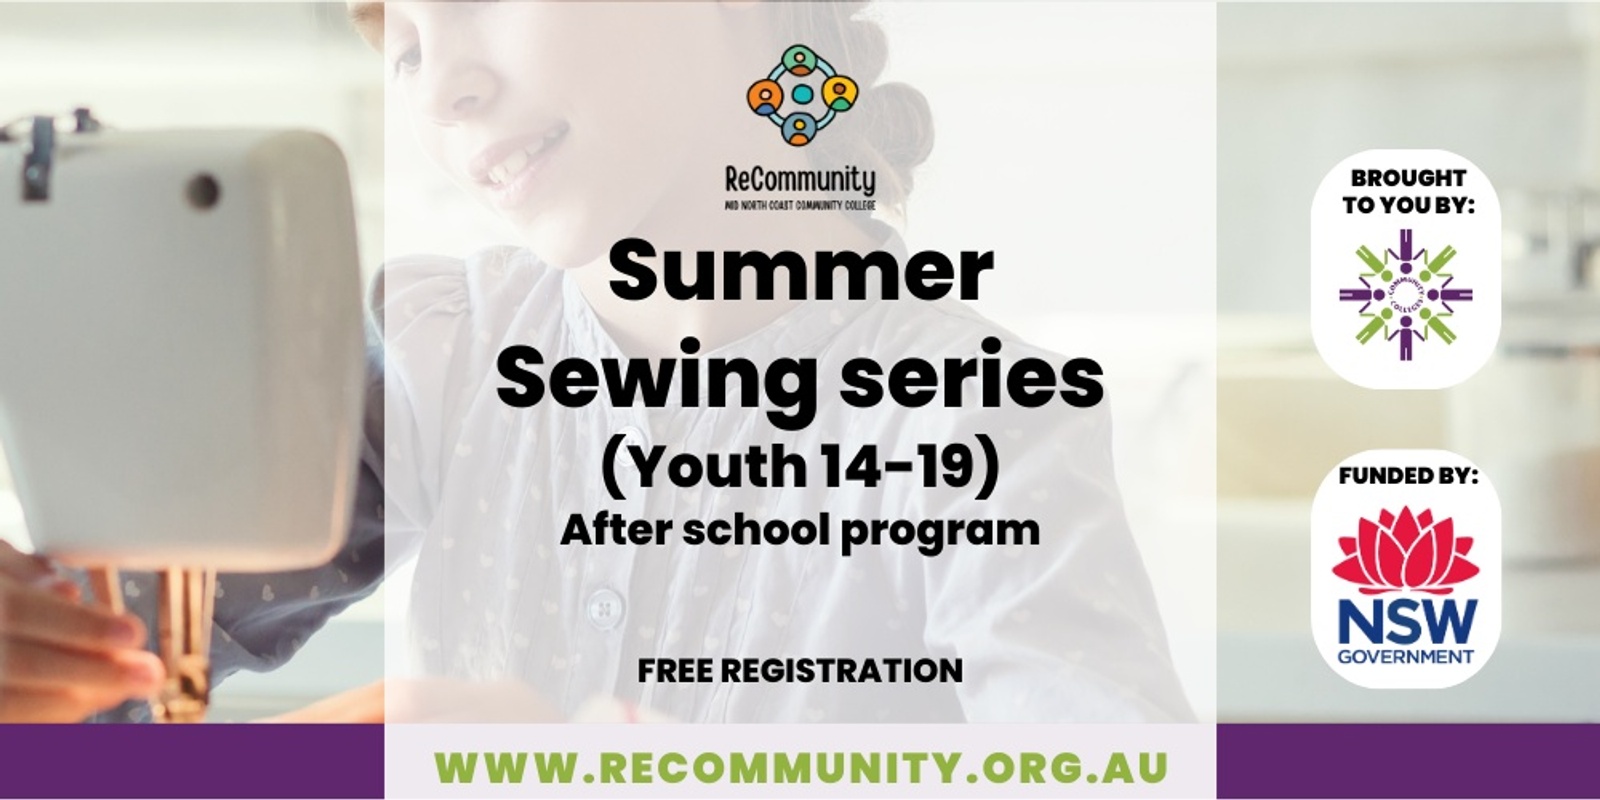 Learn to Sew Series